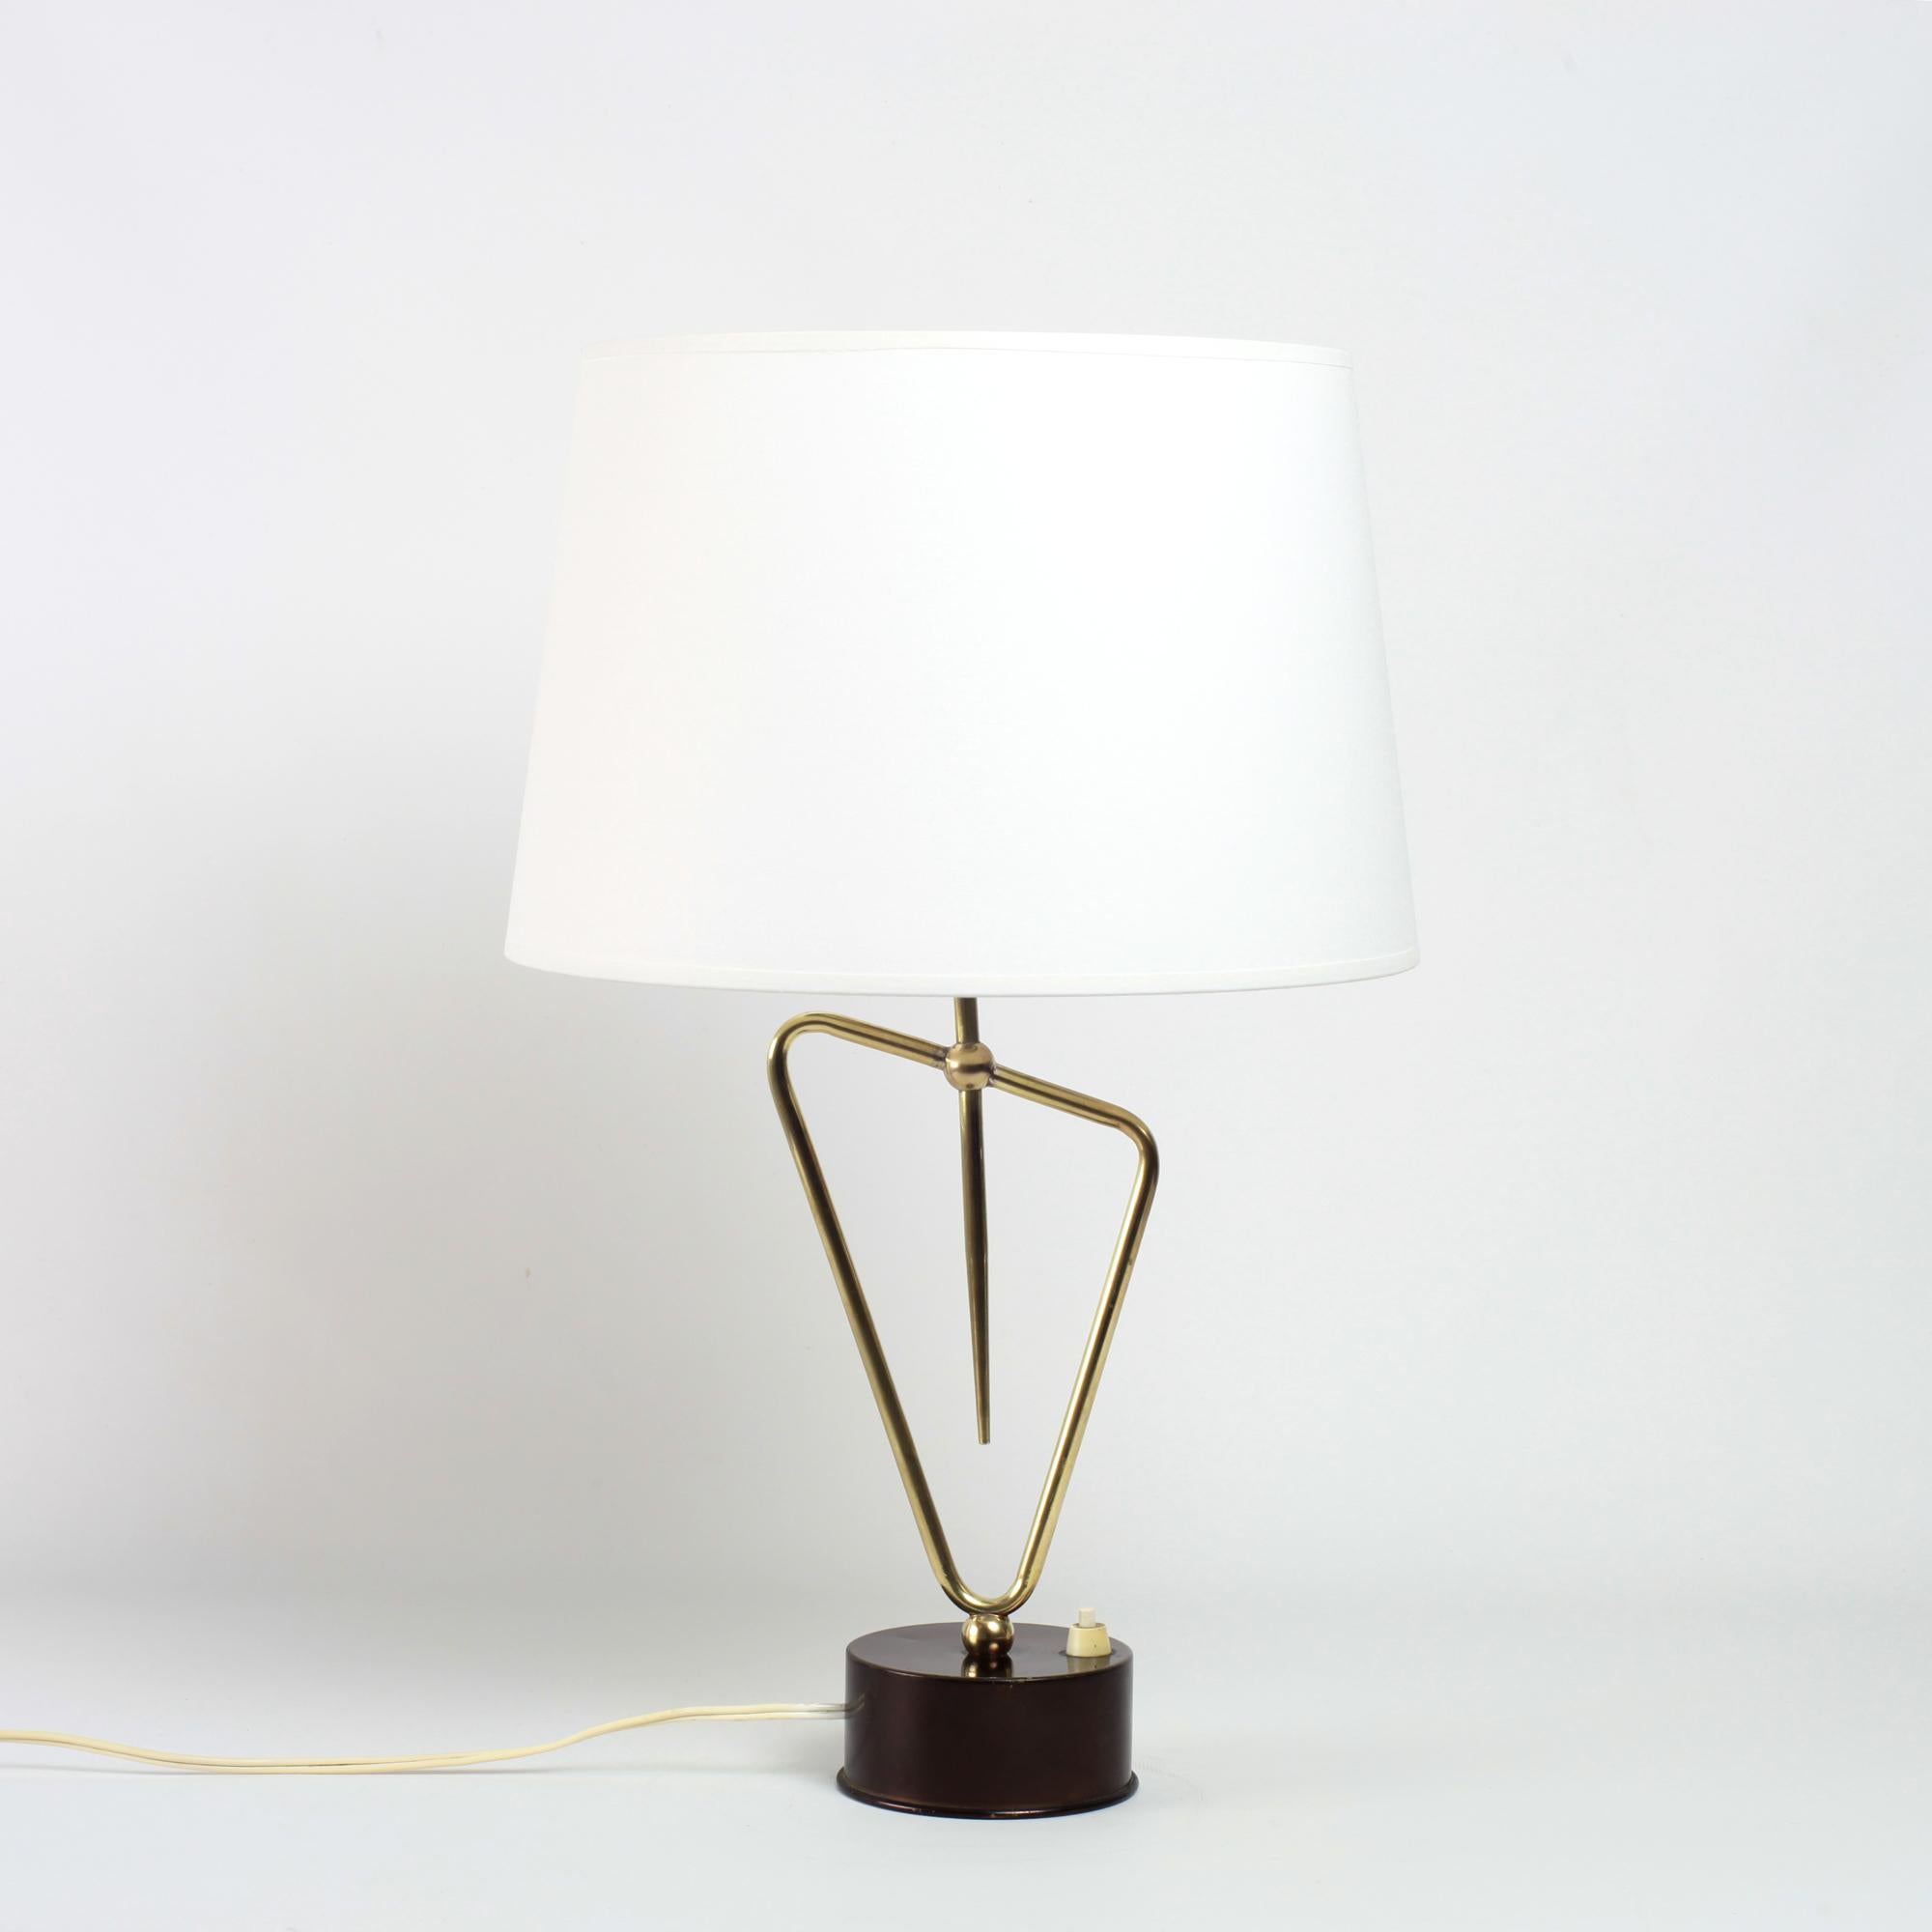 Rare brass table lamp, made in France around 1930.
This elegant lamp rests on a conical foot, holding a geometric brass figure.
A beautiful addition to your living space.
The dimensions indicated exclude the lampshade. The height includes the